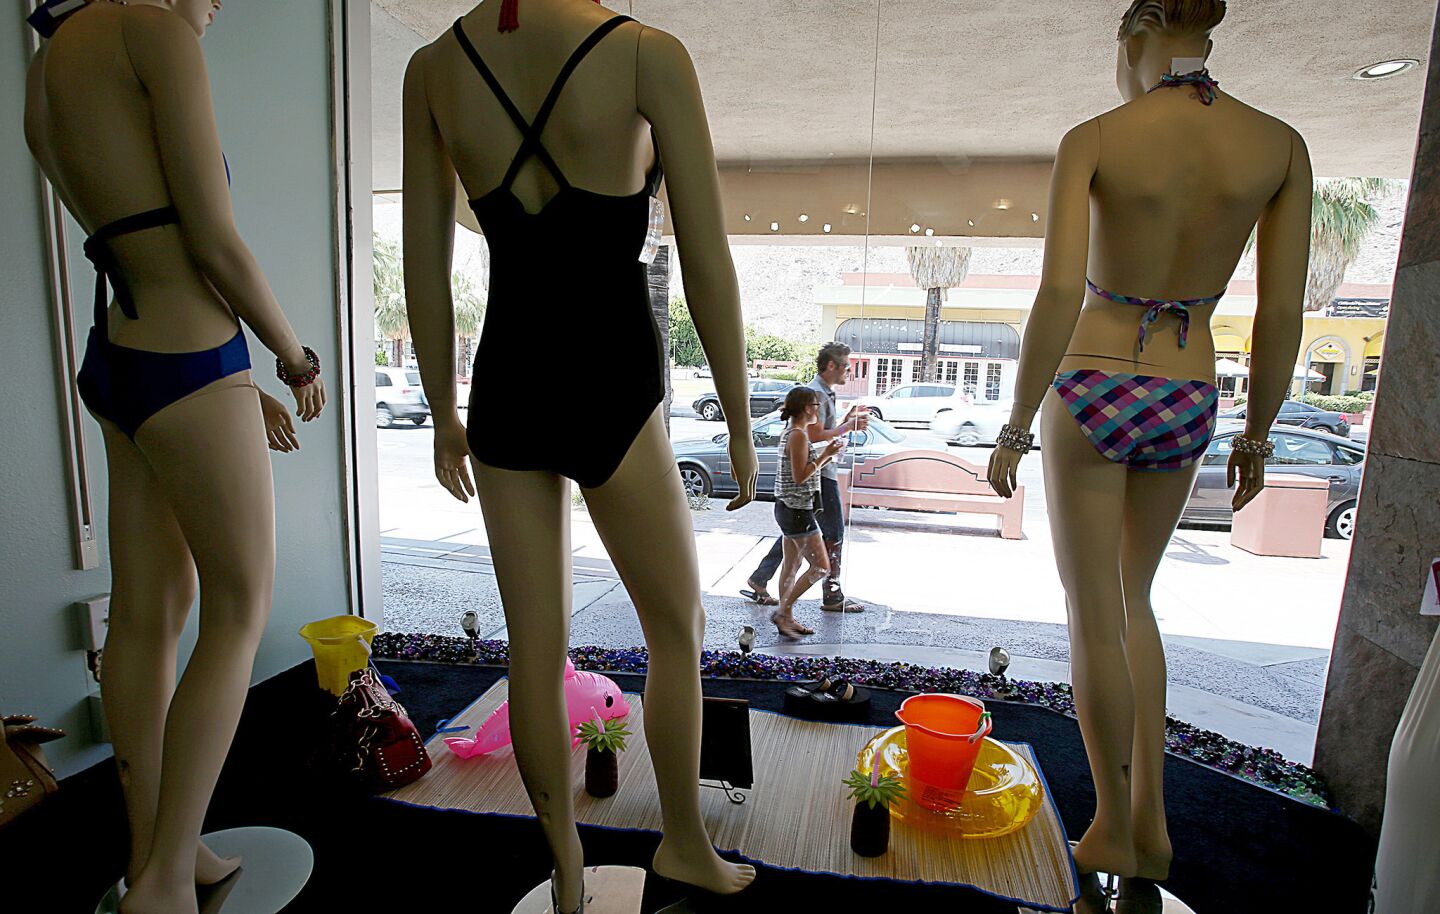 Pedestrians with cold drinks stroll past a window display of bathing suits at the Looksy Couture Boutique in Palm Springs.